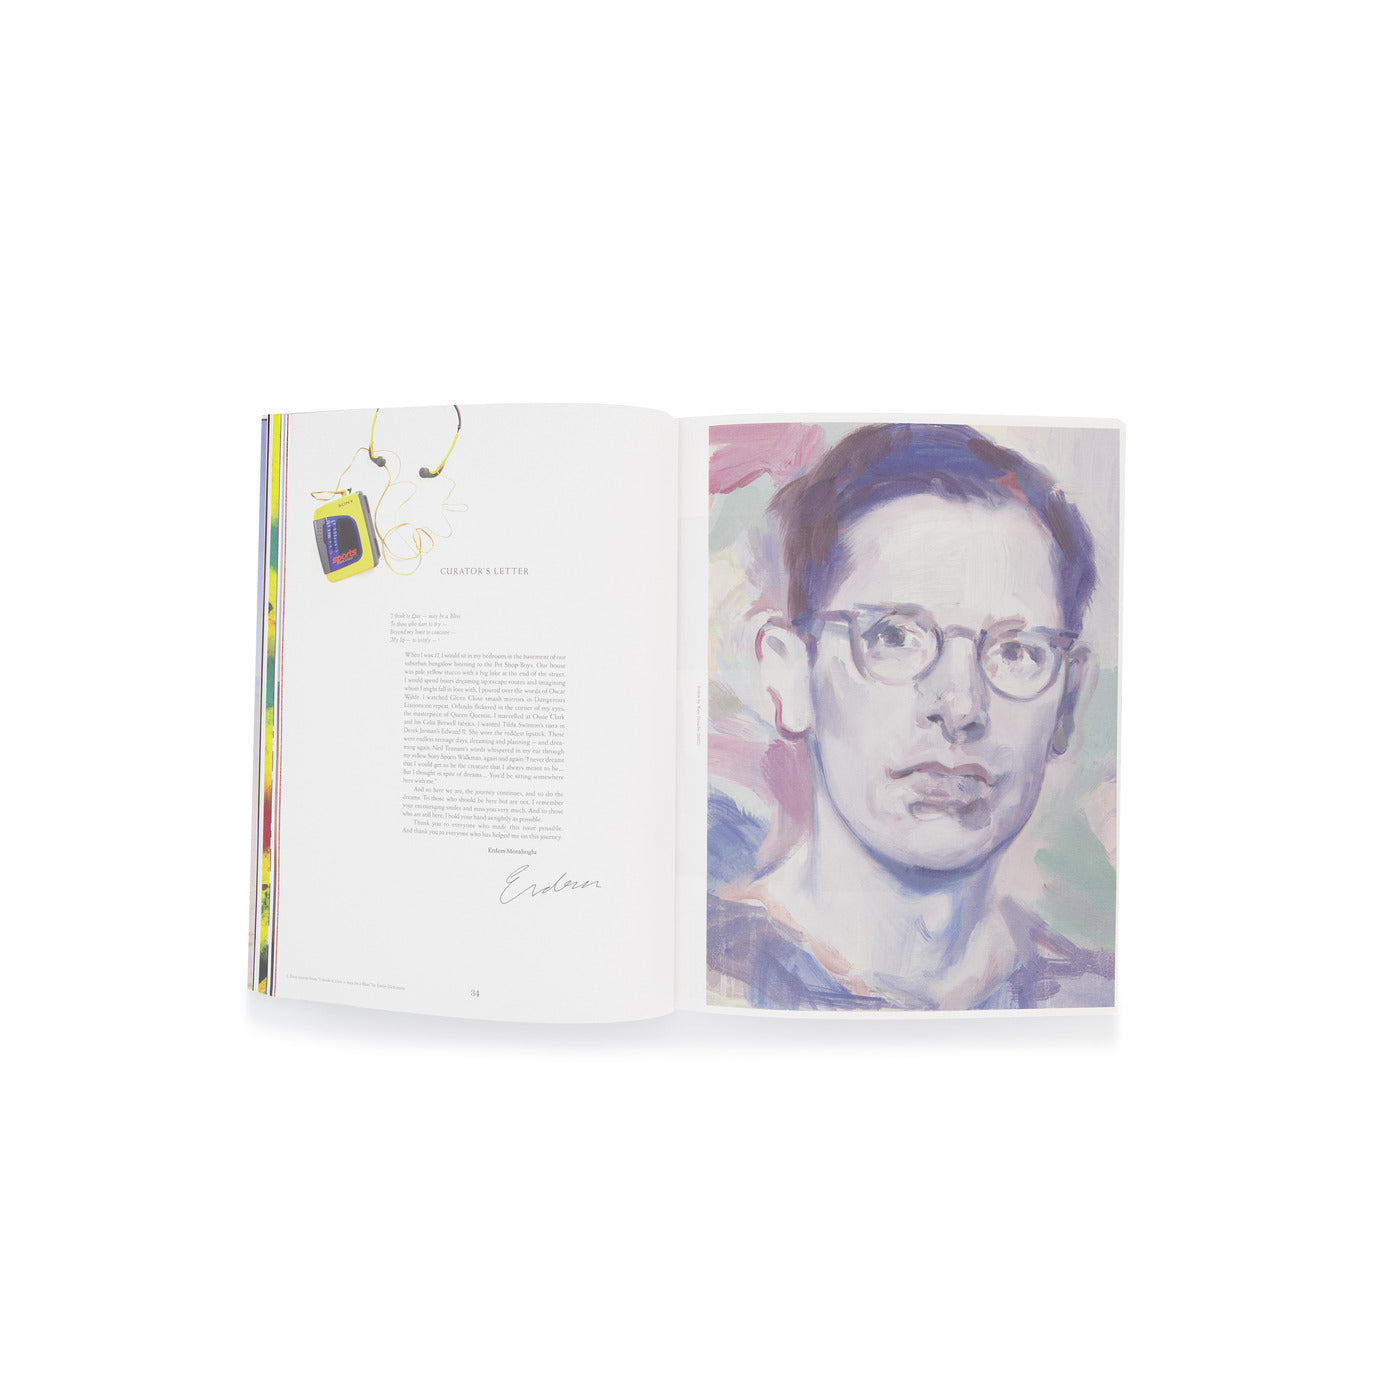 A Magazine Curated By Erdem